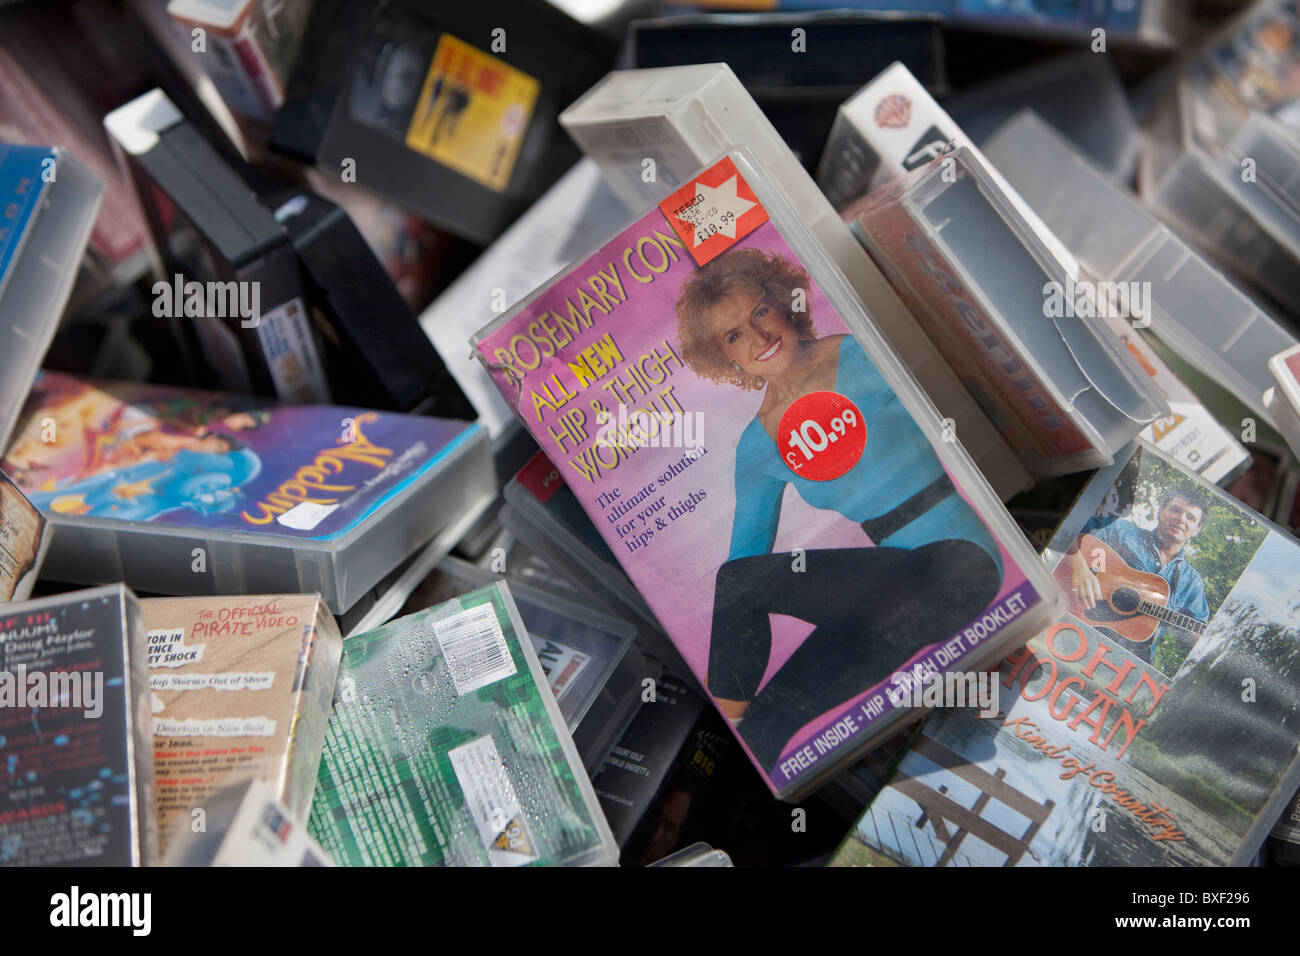 Old VHS tapes in a bargain bin. Stock Photo